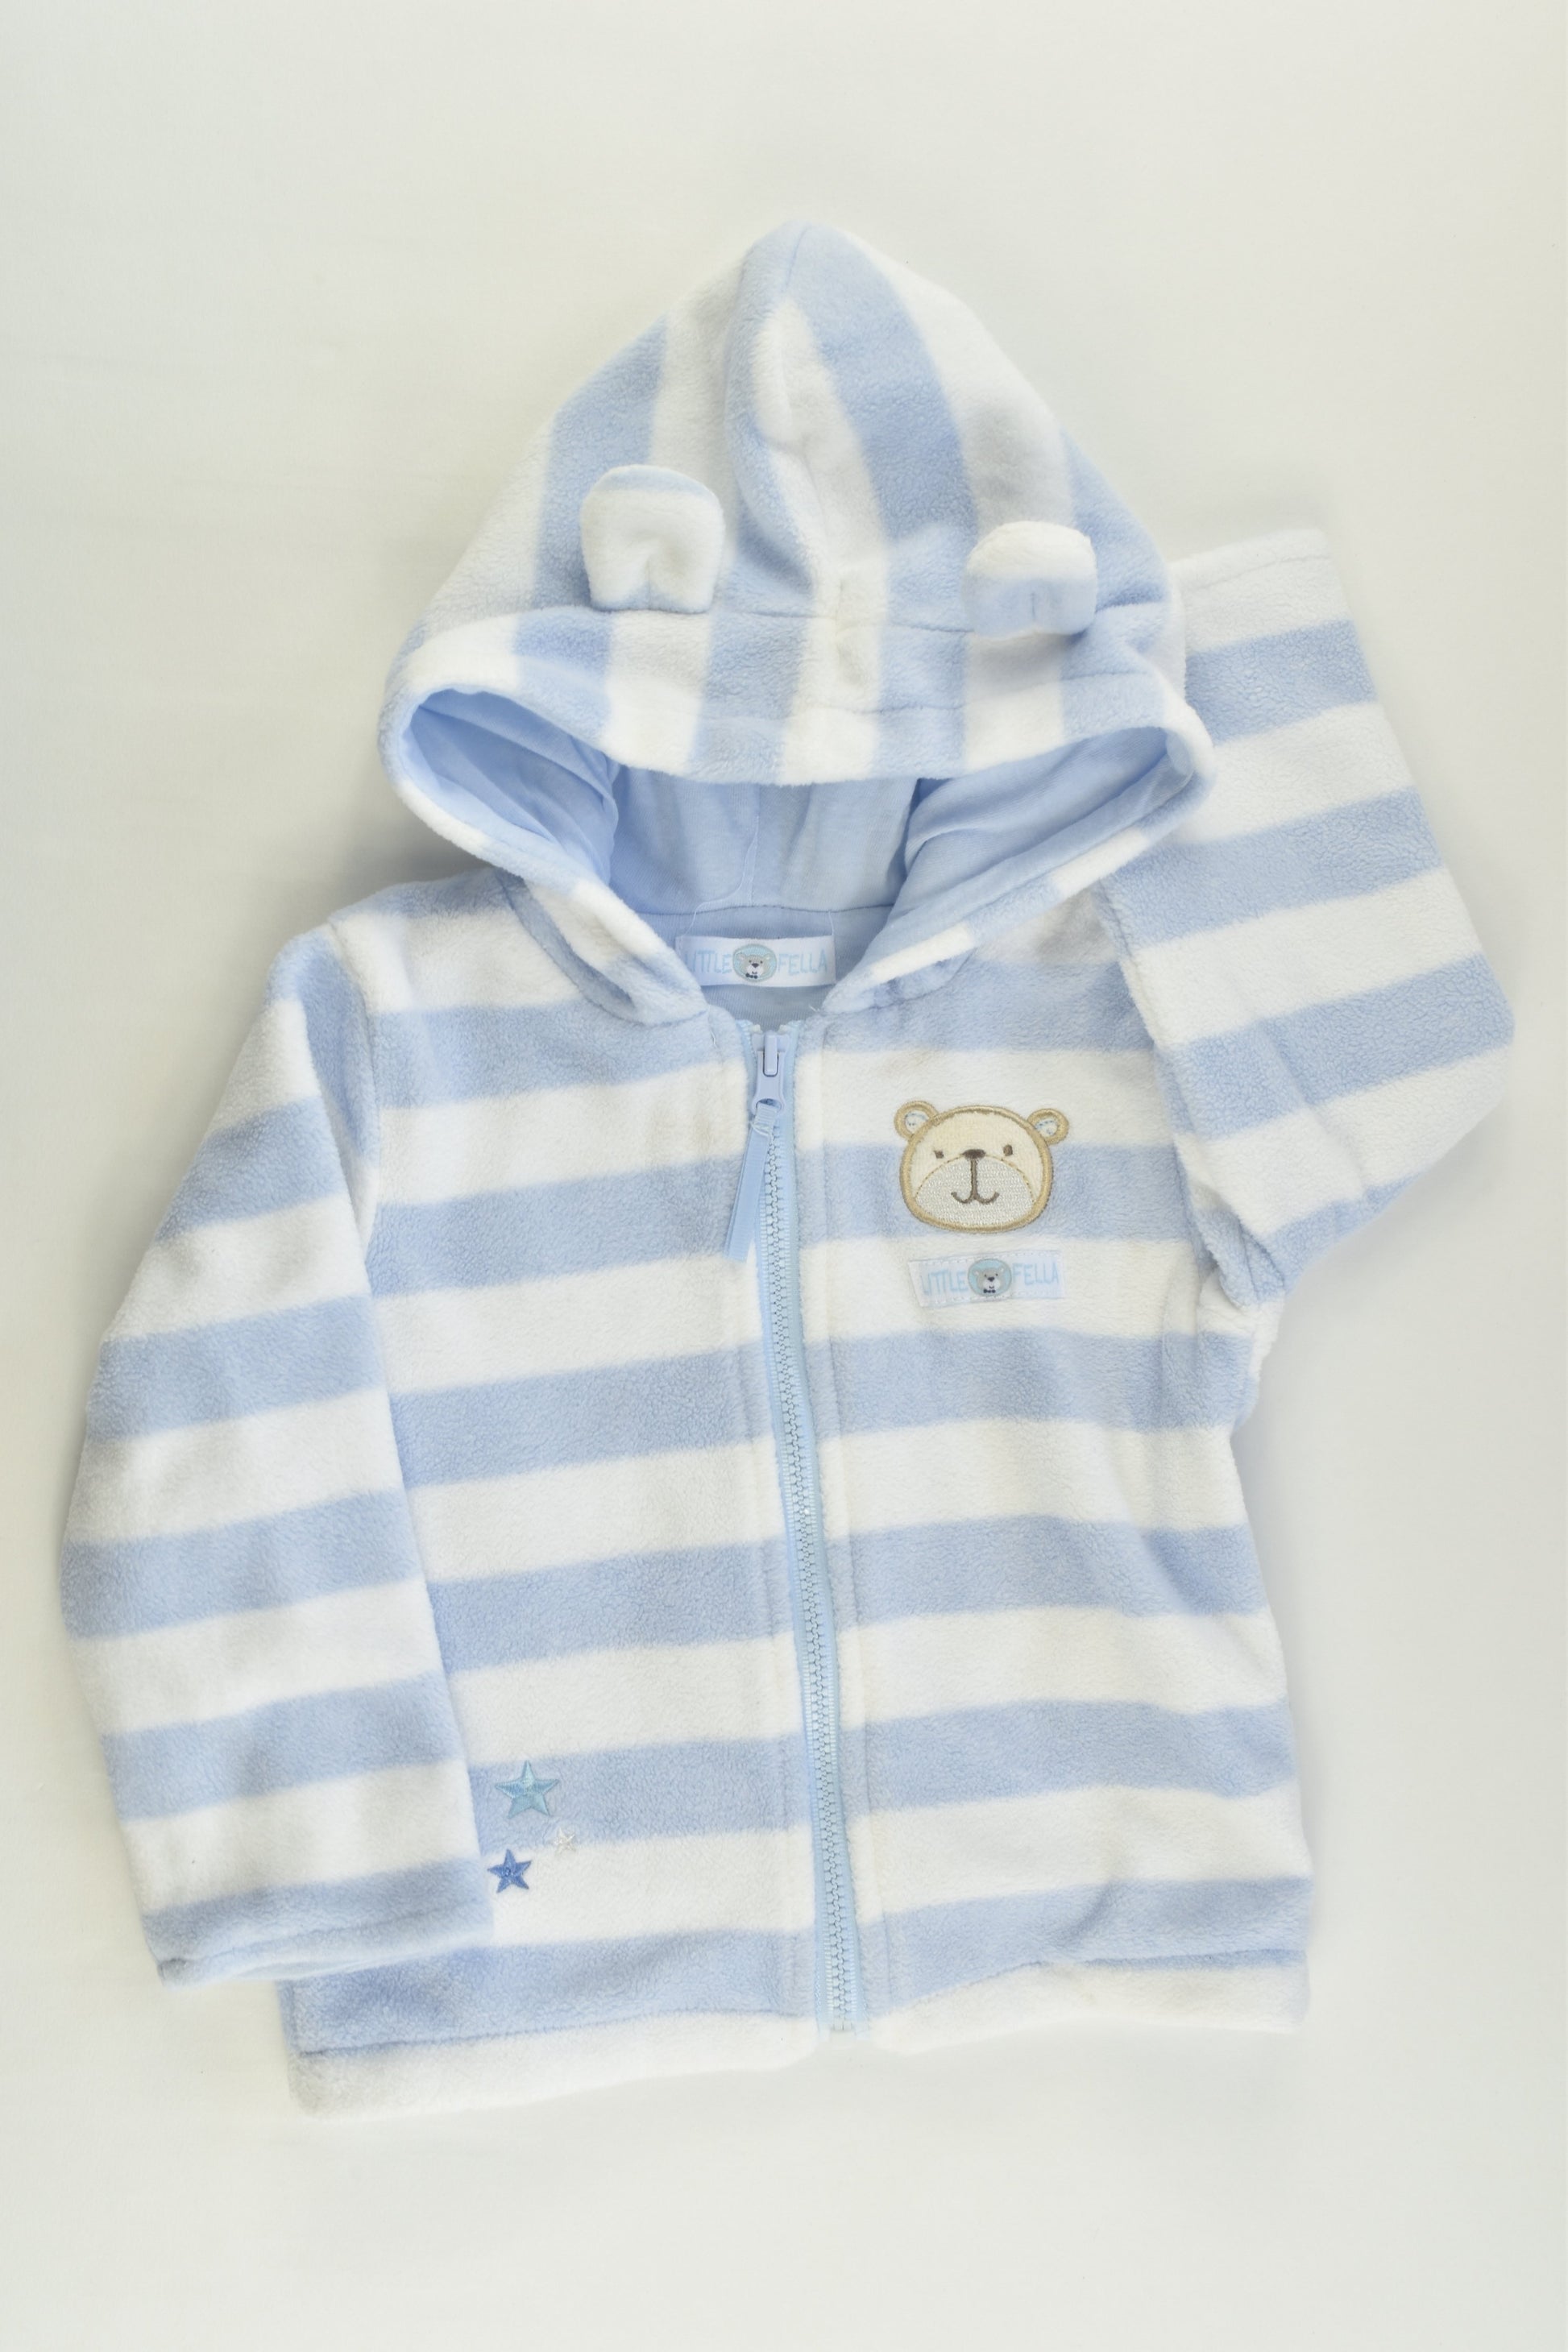 Little Fella Size 0 (6/9 months) Bear and Bunny Outfit